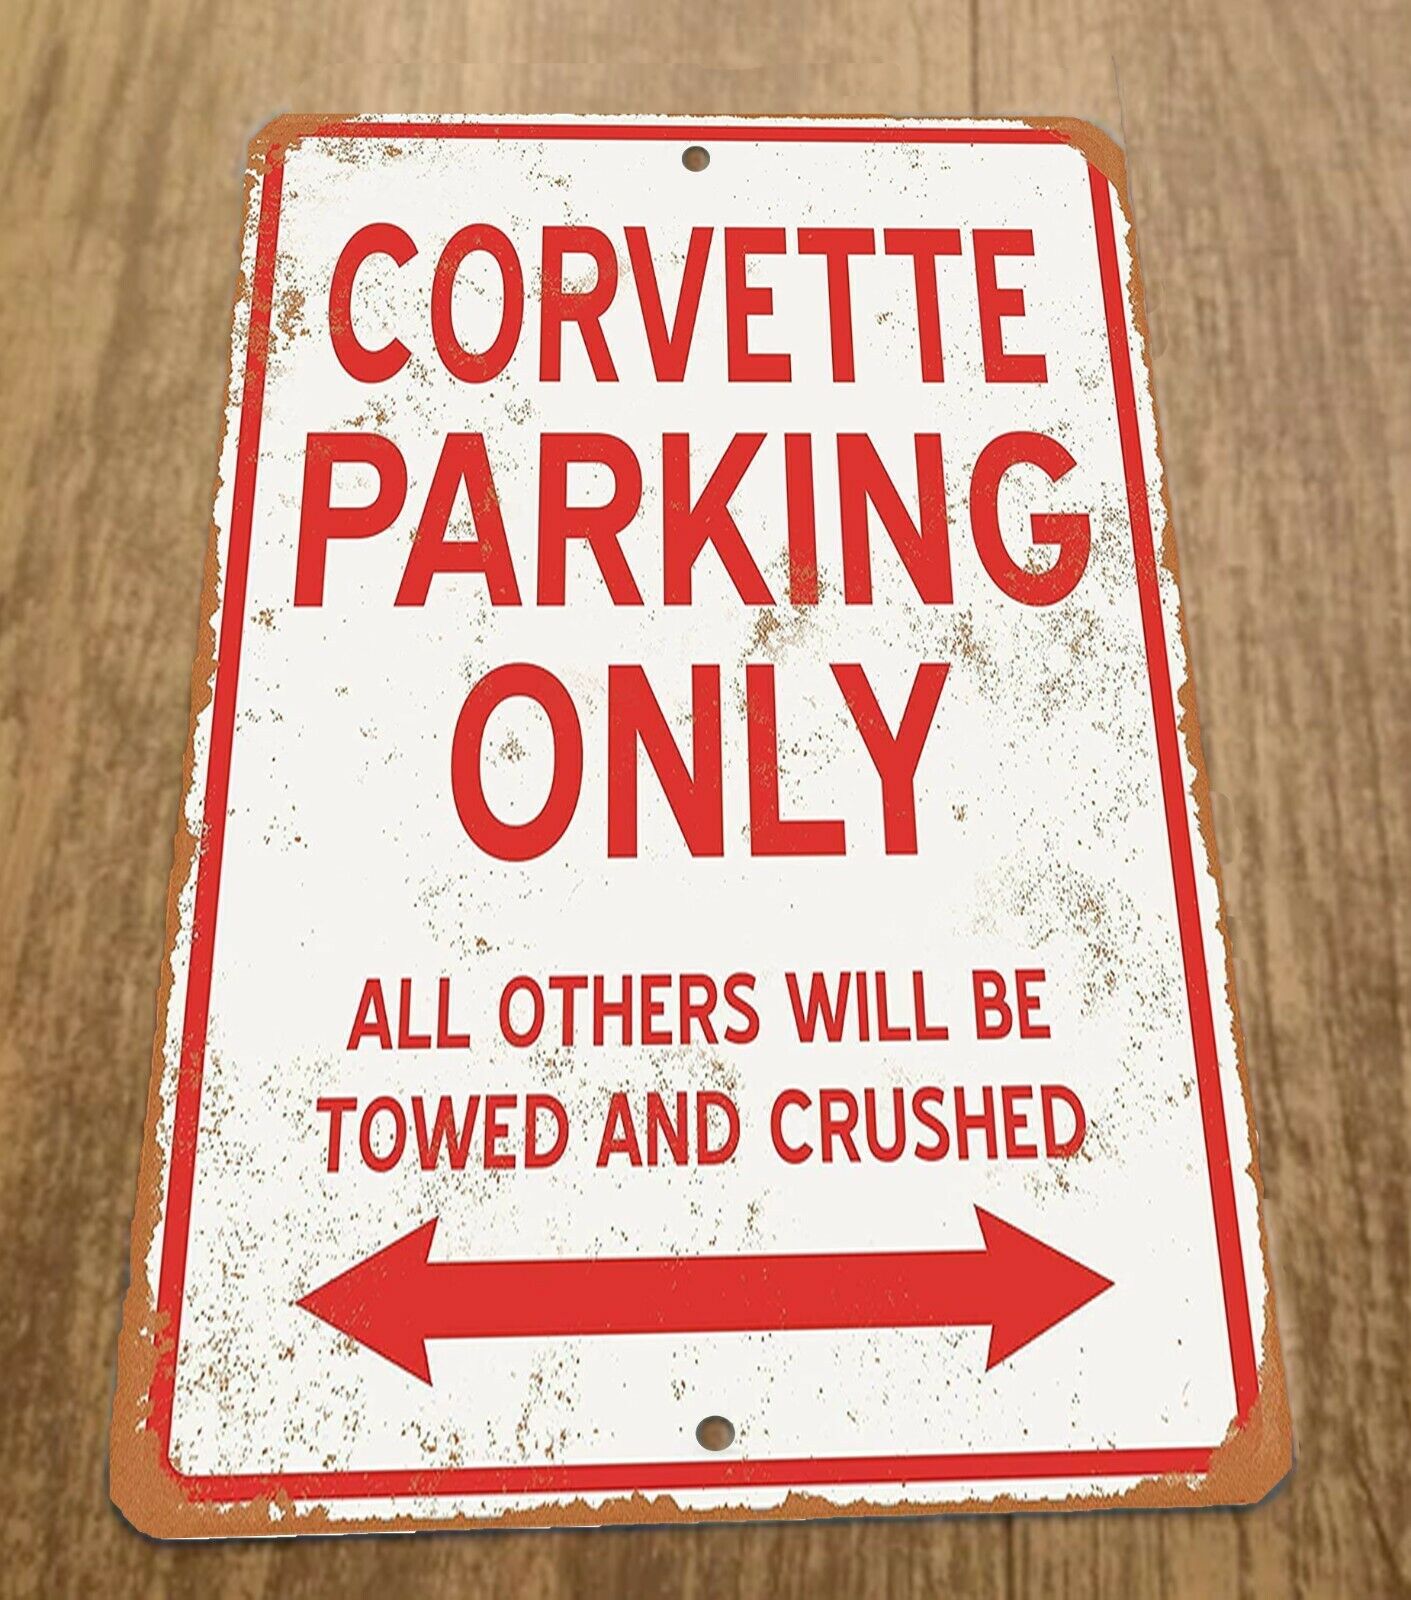 Corvette parking Only All other will be Towed and Crushed 8x12 Metal Wall Car Sign Garage Poster